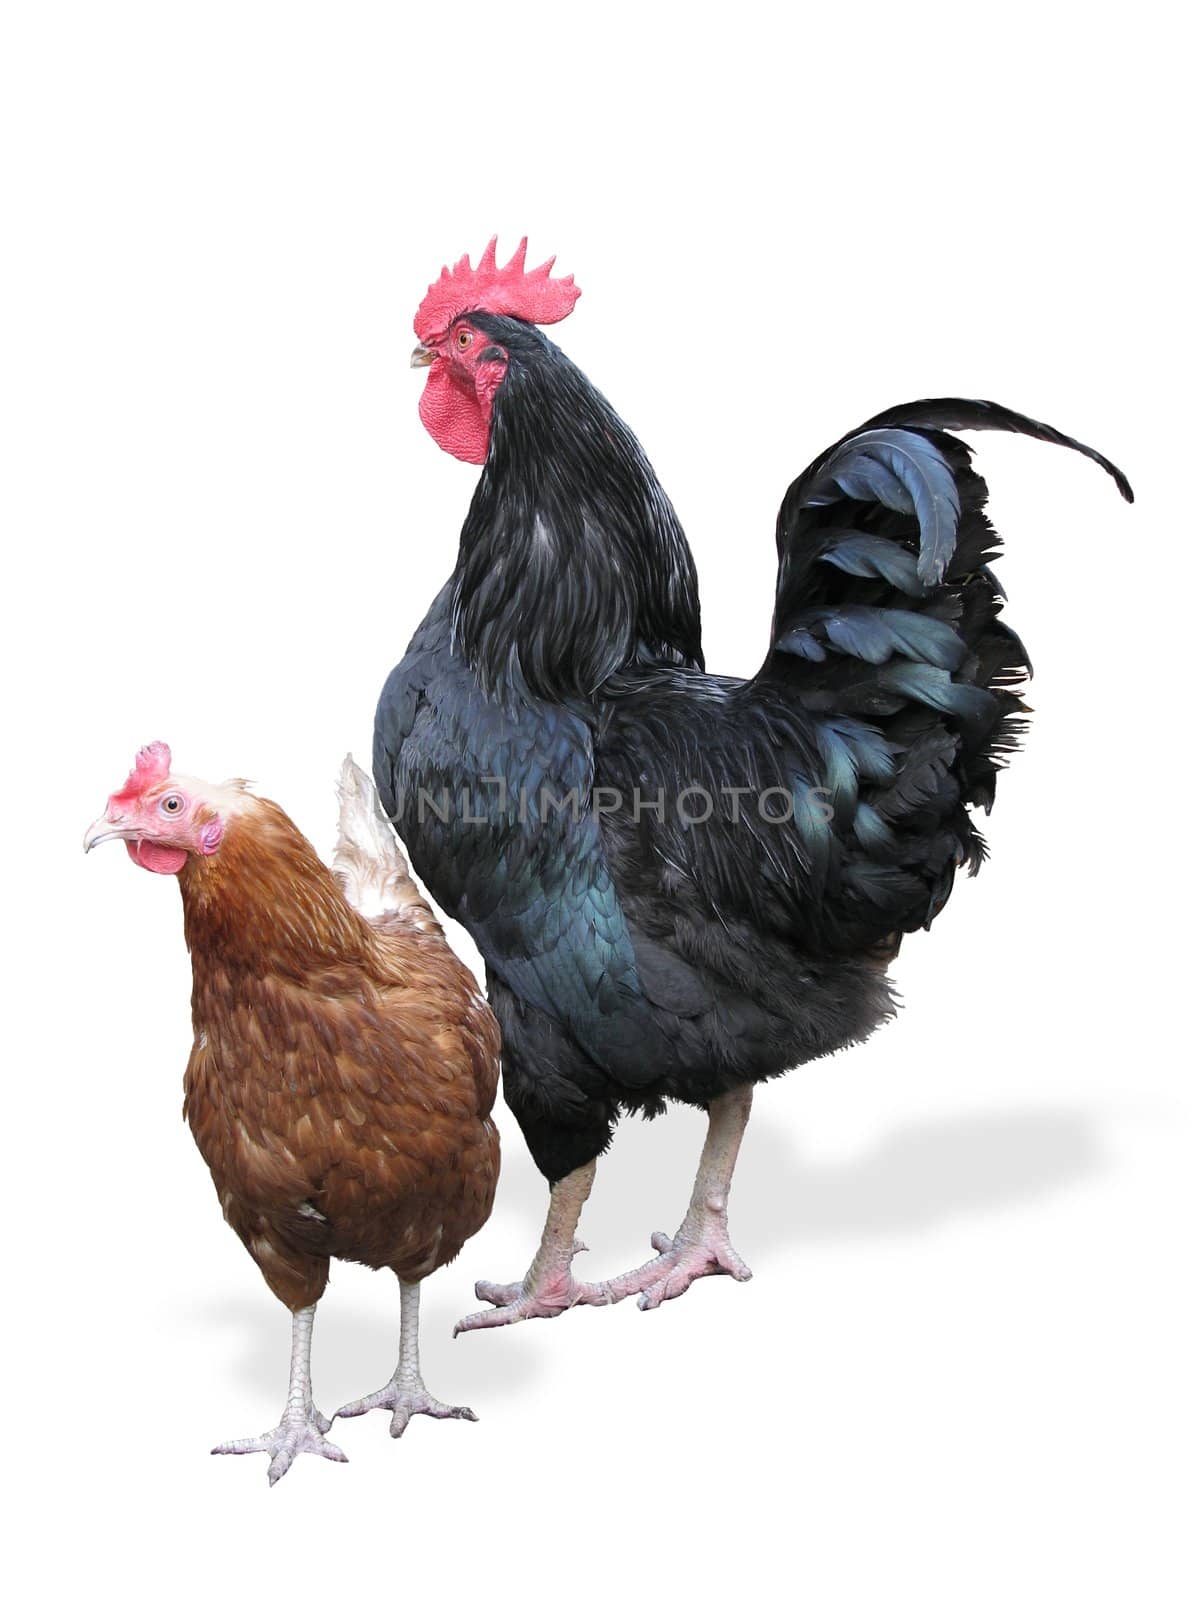 The curious red hen near to the black proud rooster. clipping path